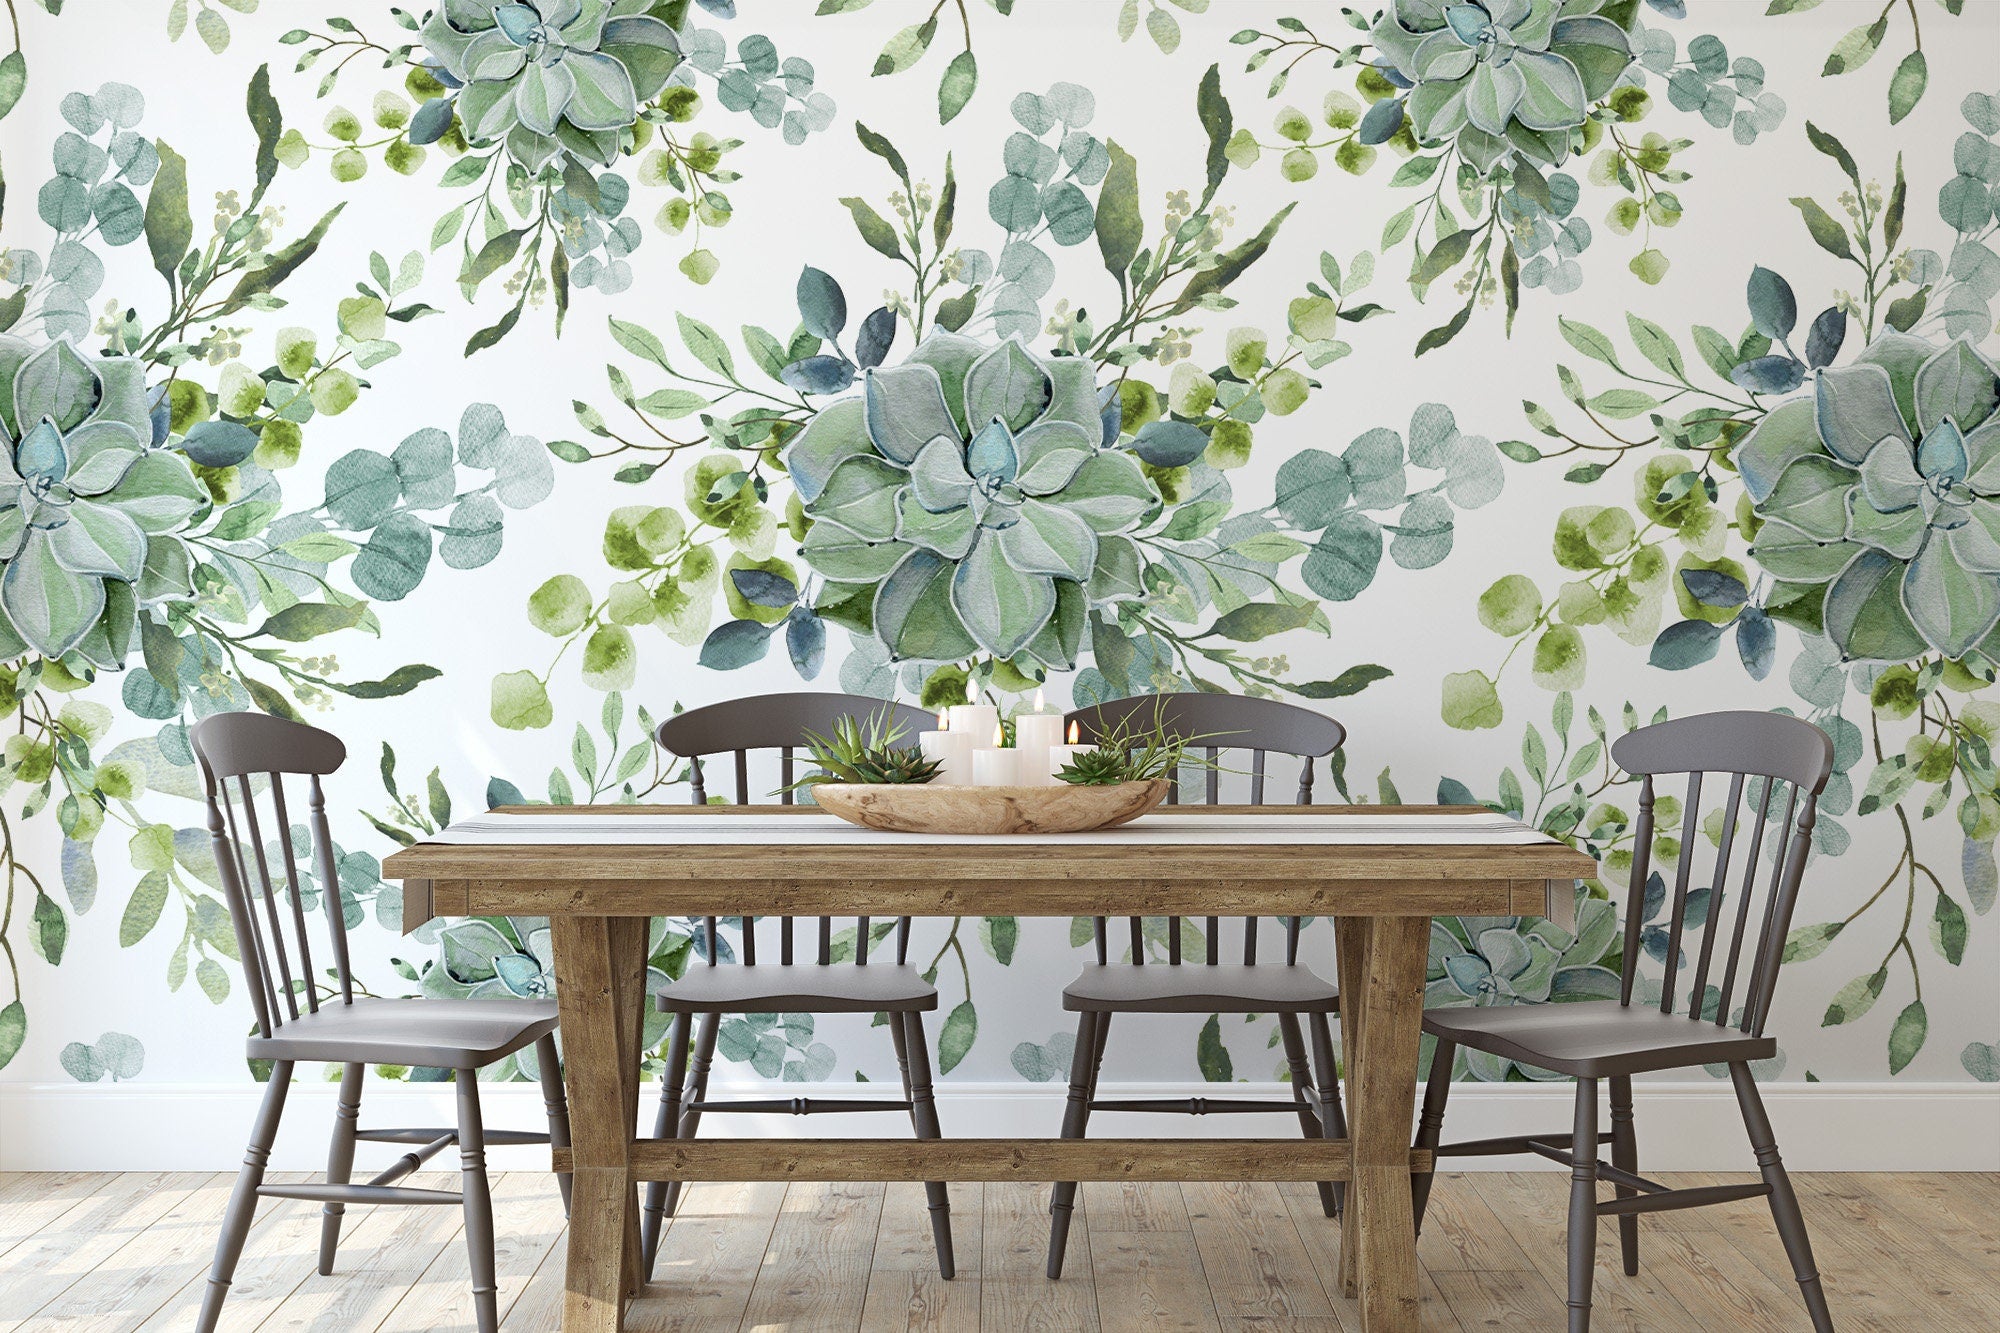 Amazoncom Floral Peel and Stick Wallpaper Contact Paper Vintage Removable  Wallpaper Bird Stick on Wallpaper Self Adhesive Green Wallpaper   Everything Else